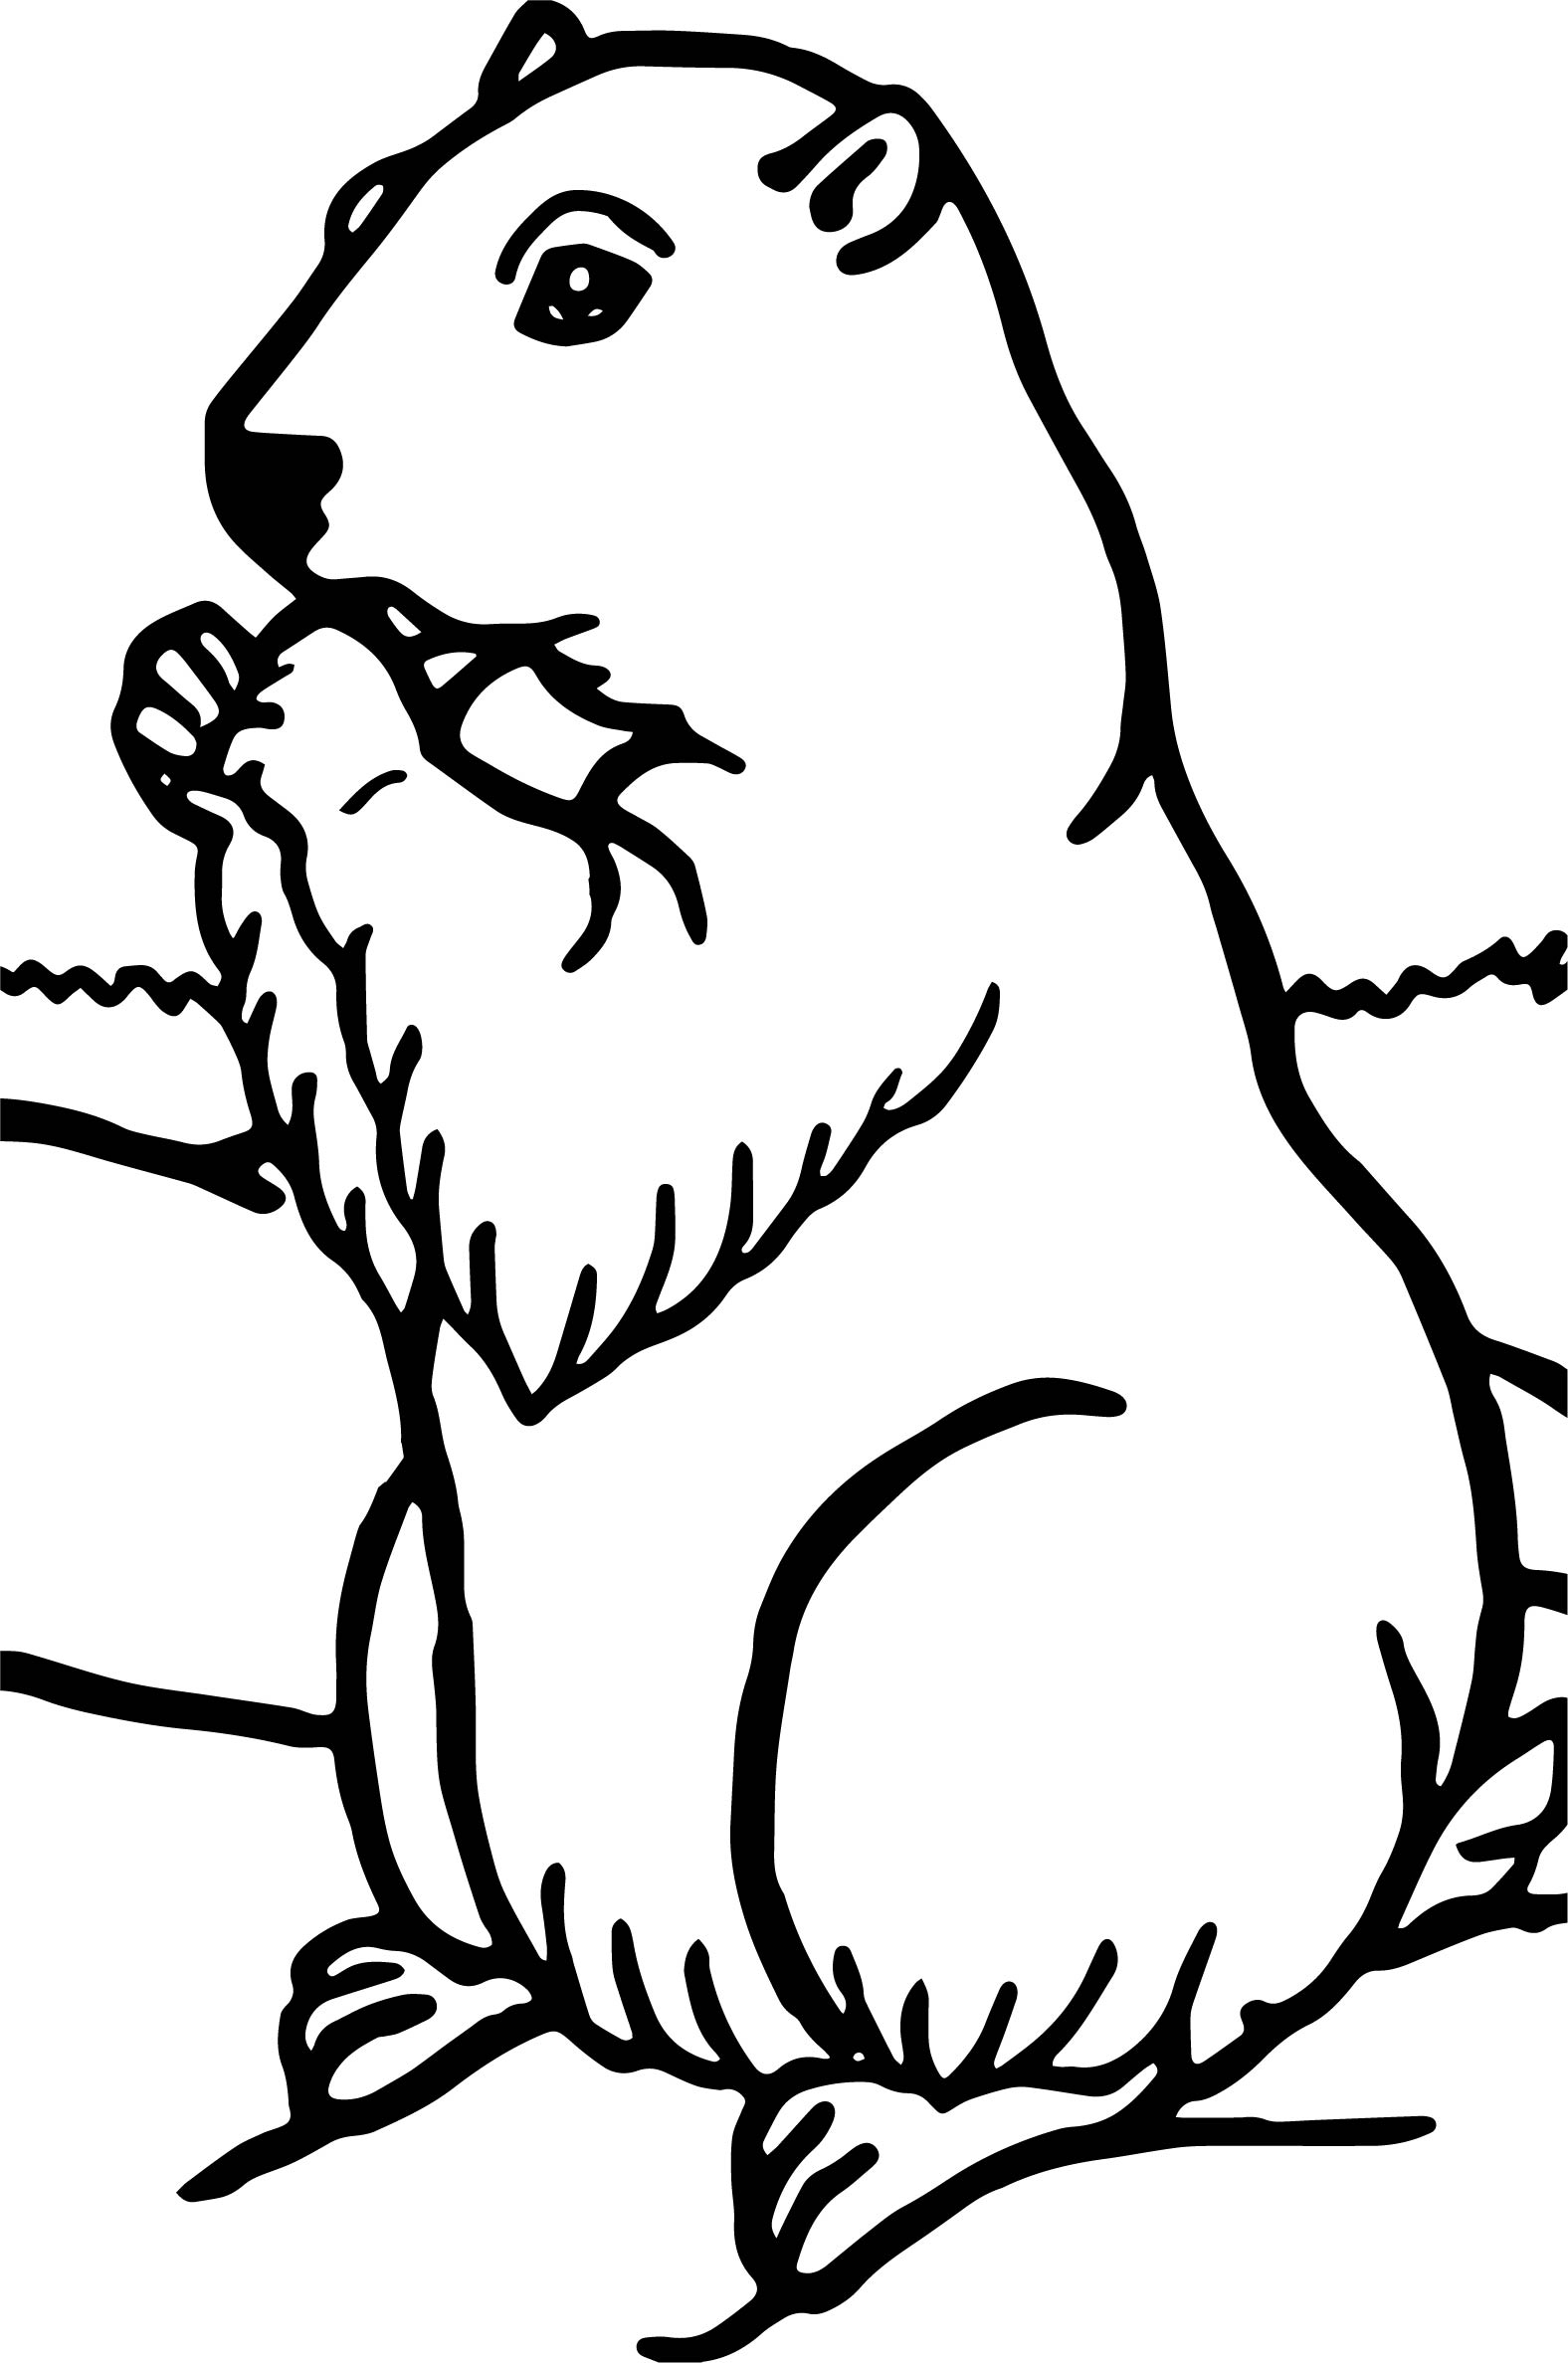 Simple Free Coloring Pages For Groundhog Day for Kids